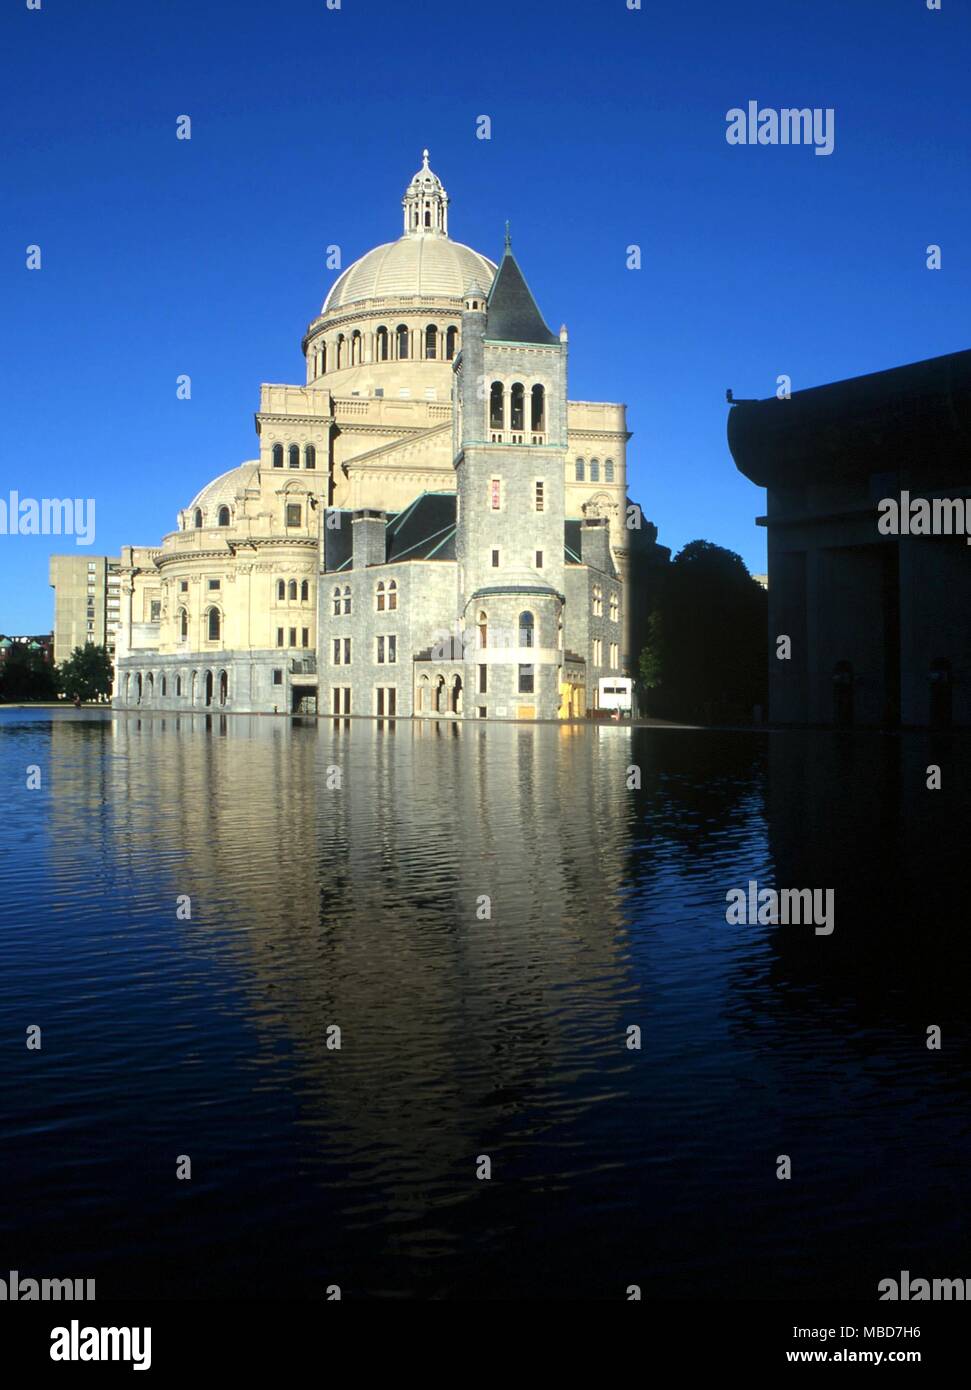 The Christian Science complex in Boston, Massachussetts, the world headquarters of the religion founded by Mary Baker Eddy in 1879. Stock Photo